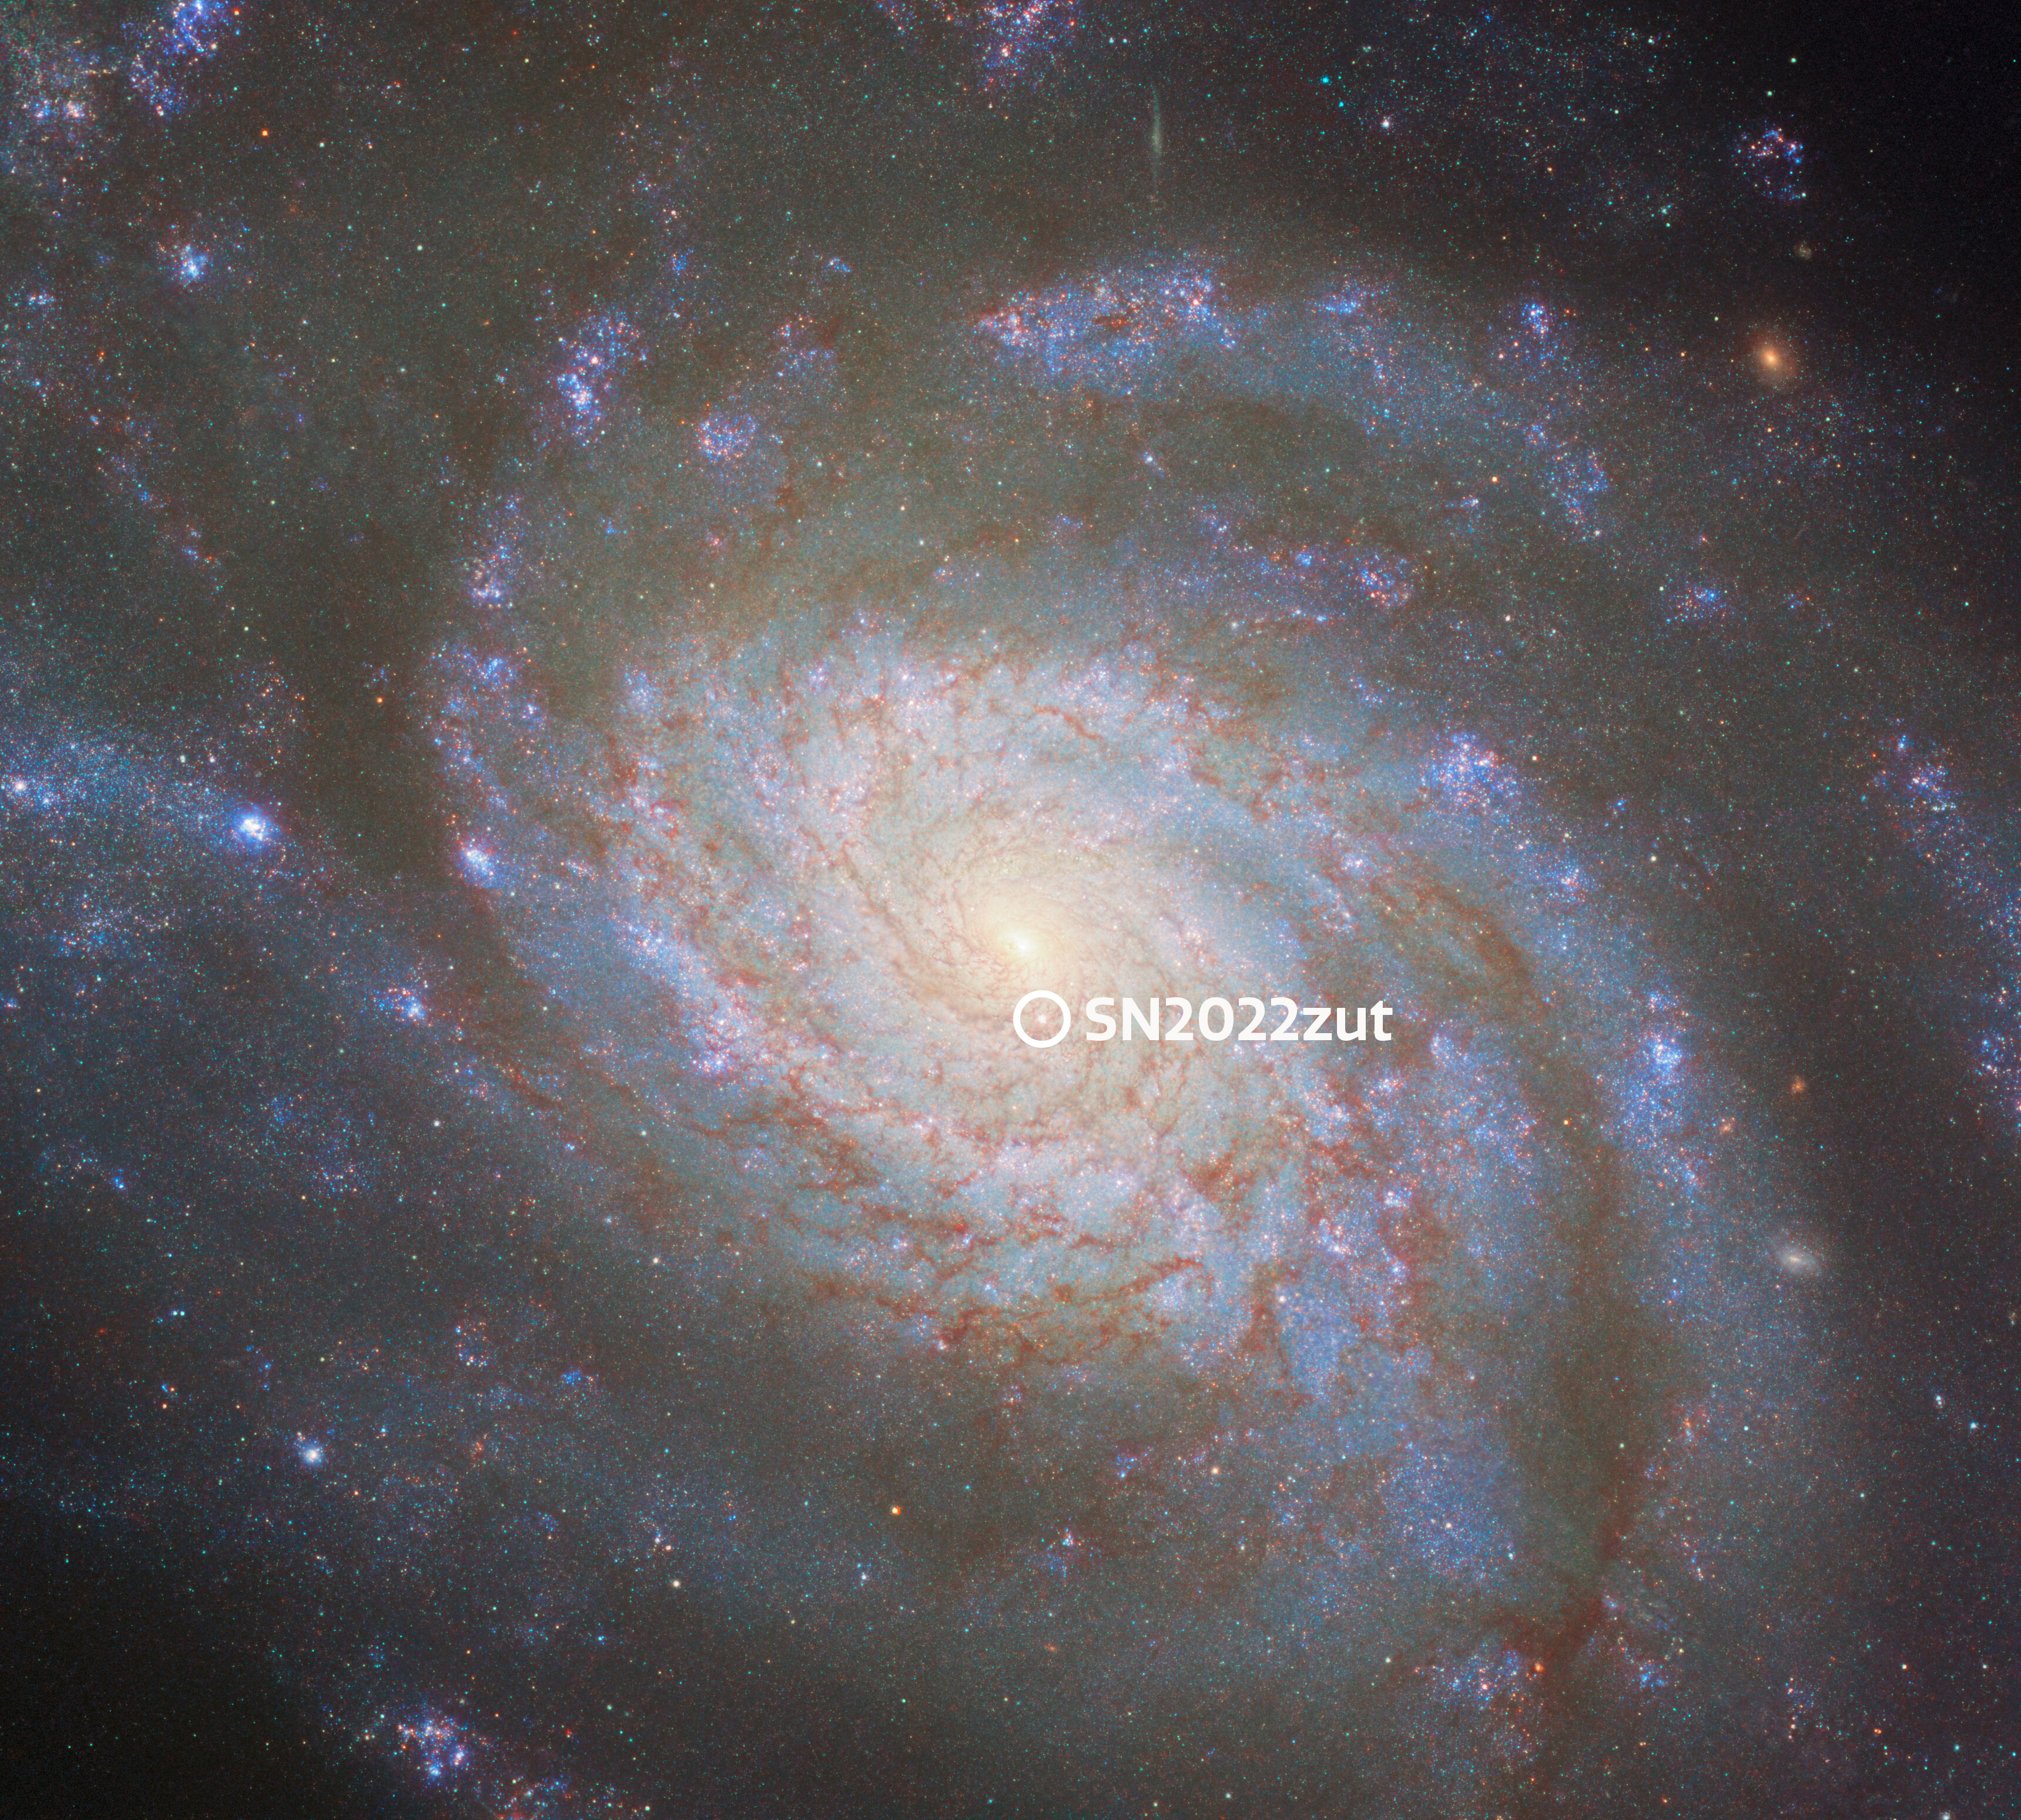 A spiral galaxy with a shining core at its center and winding spiral arms that extend outward. A bright point in the galaxy, just below the core, is the Type Ia supernova, SN2022zut. A white circle marks the supernova.